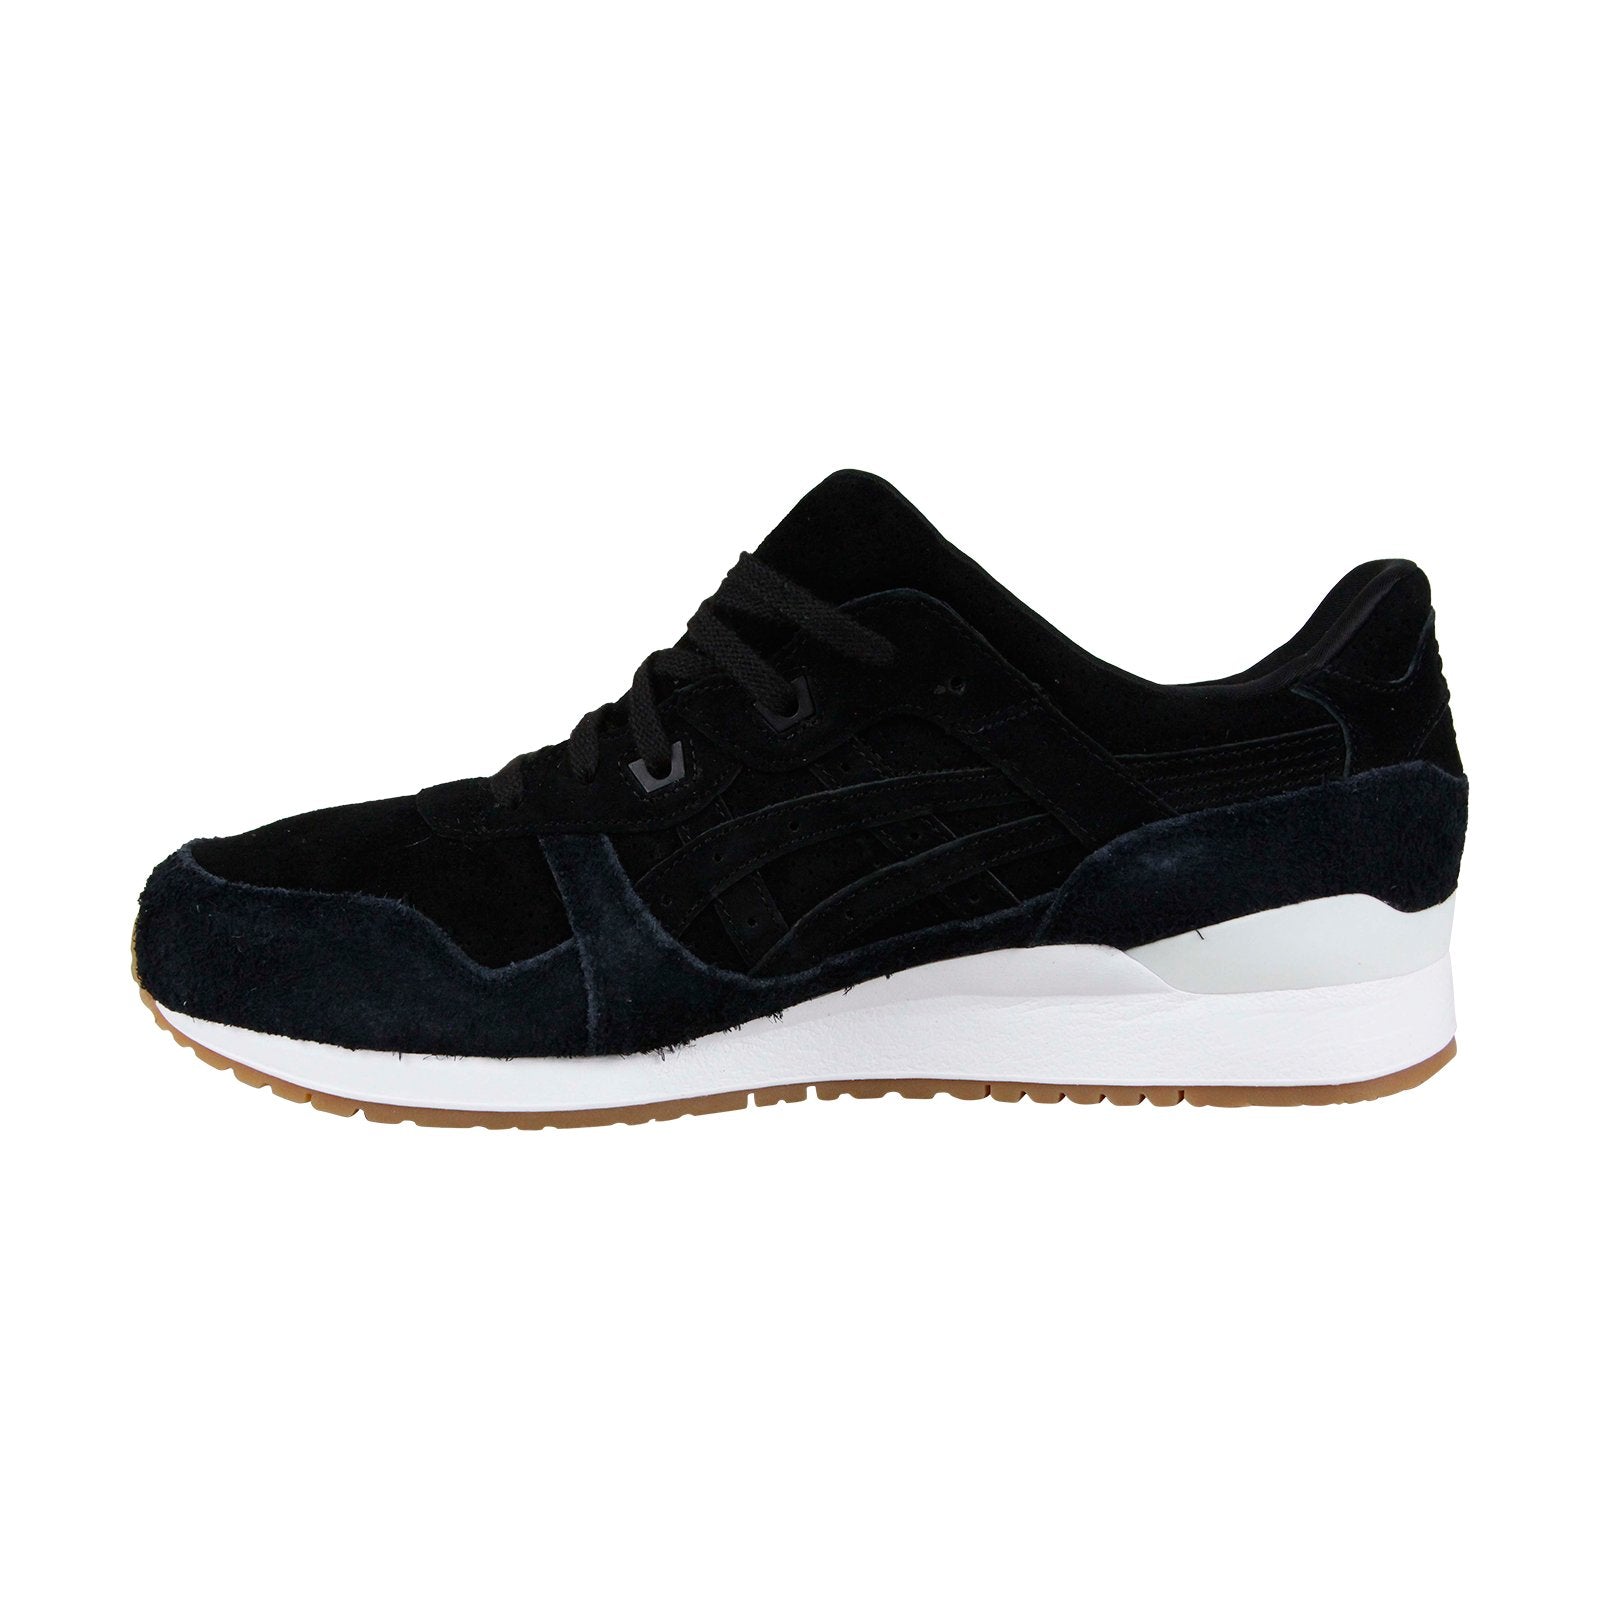 Egomania nicotine Typisch Asics Gel Lyte III HL7X3-9090 Mens Black Suede Lace Up Lifestyle Sneak -  Ruze Shoes